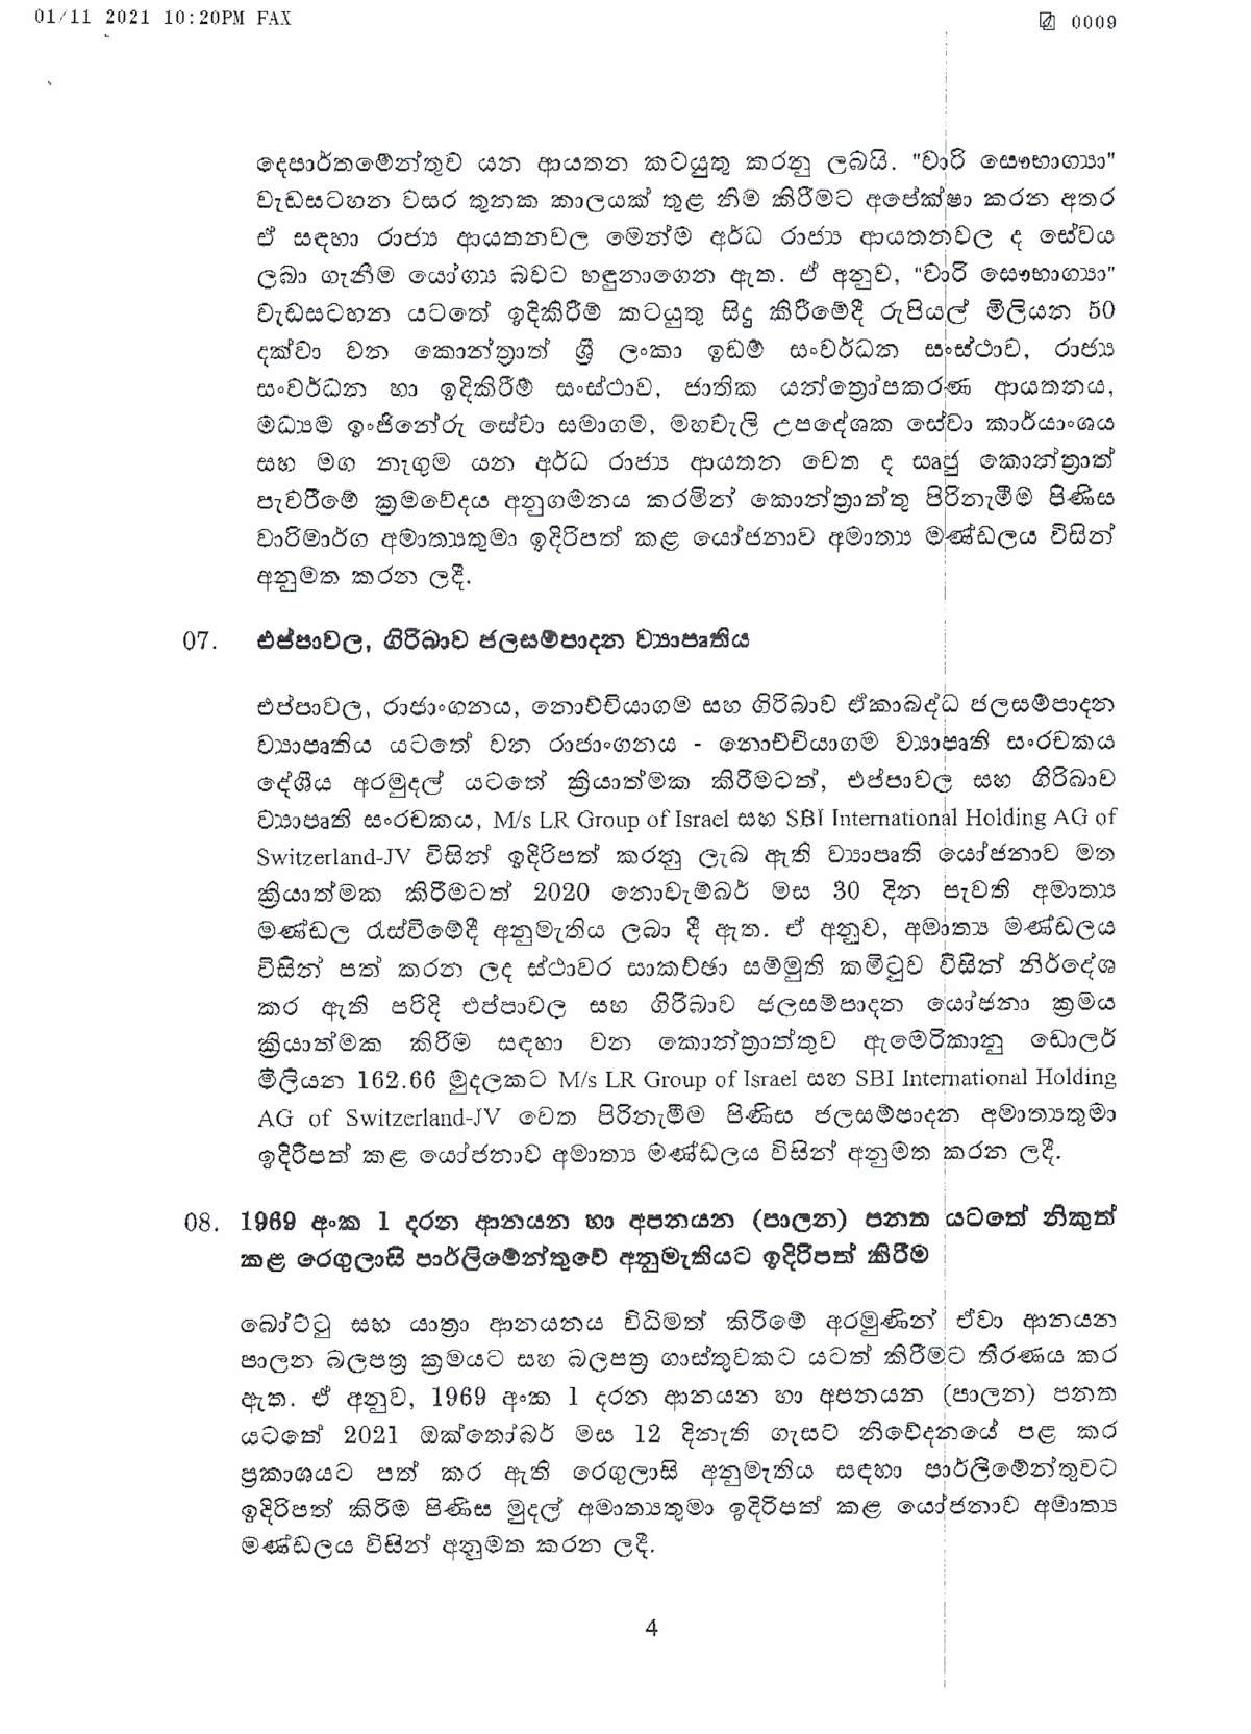 Cabinet Decisions on 01.11.2021 page 004